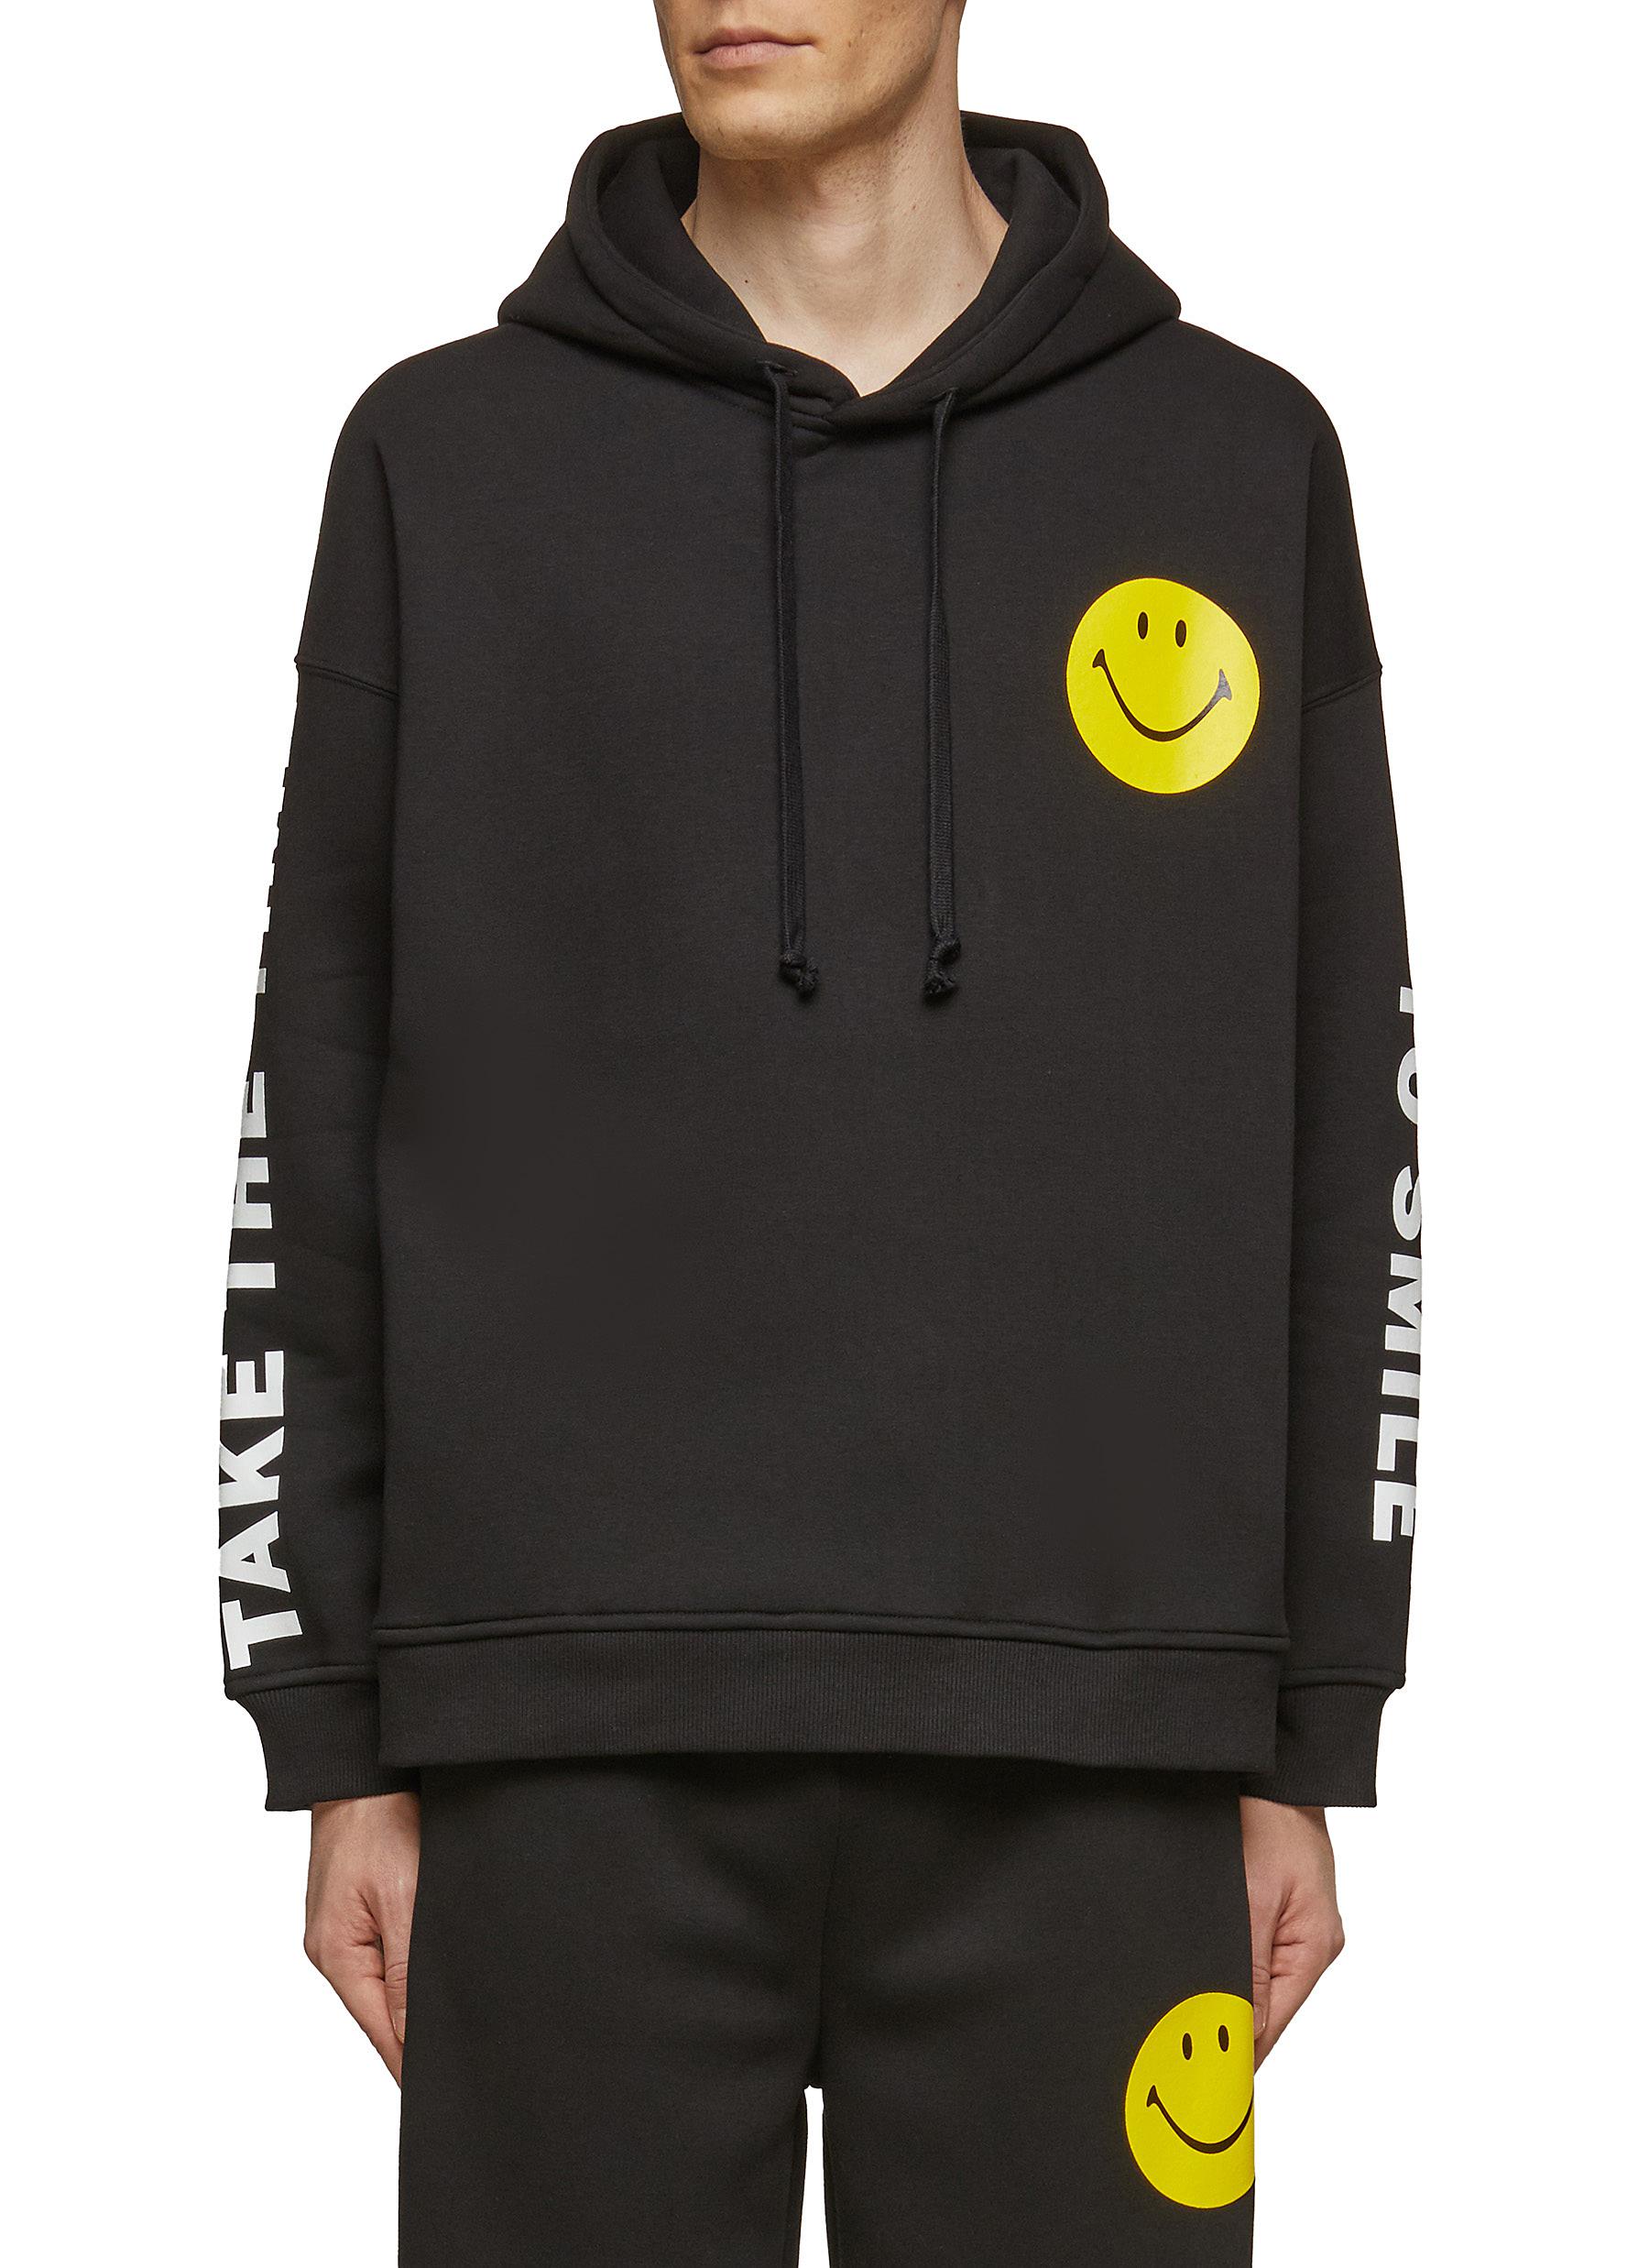 CHEST SMILEY FACE TAKE THE TIME SMILEY SLEEVE PULLOVER HOODIE